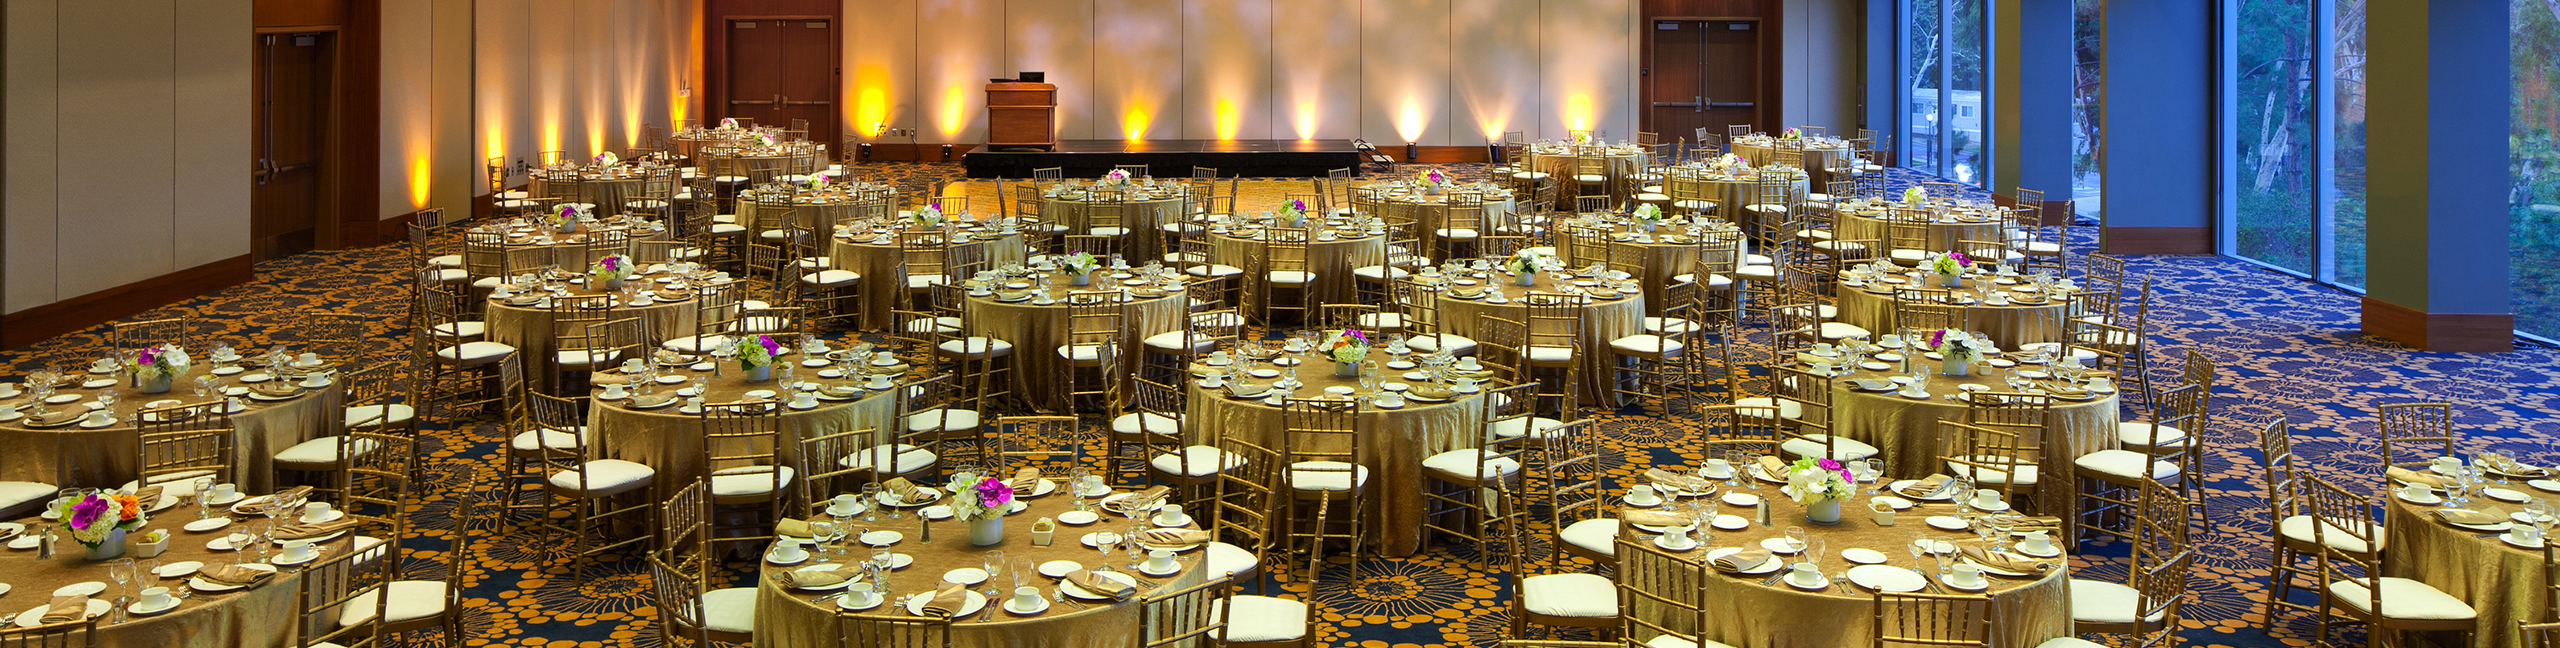 UCLA conference venues and catering